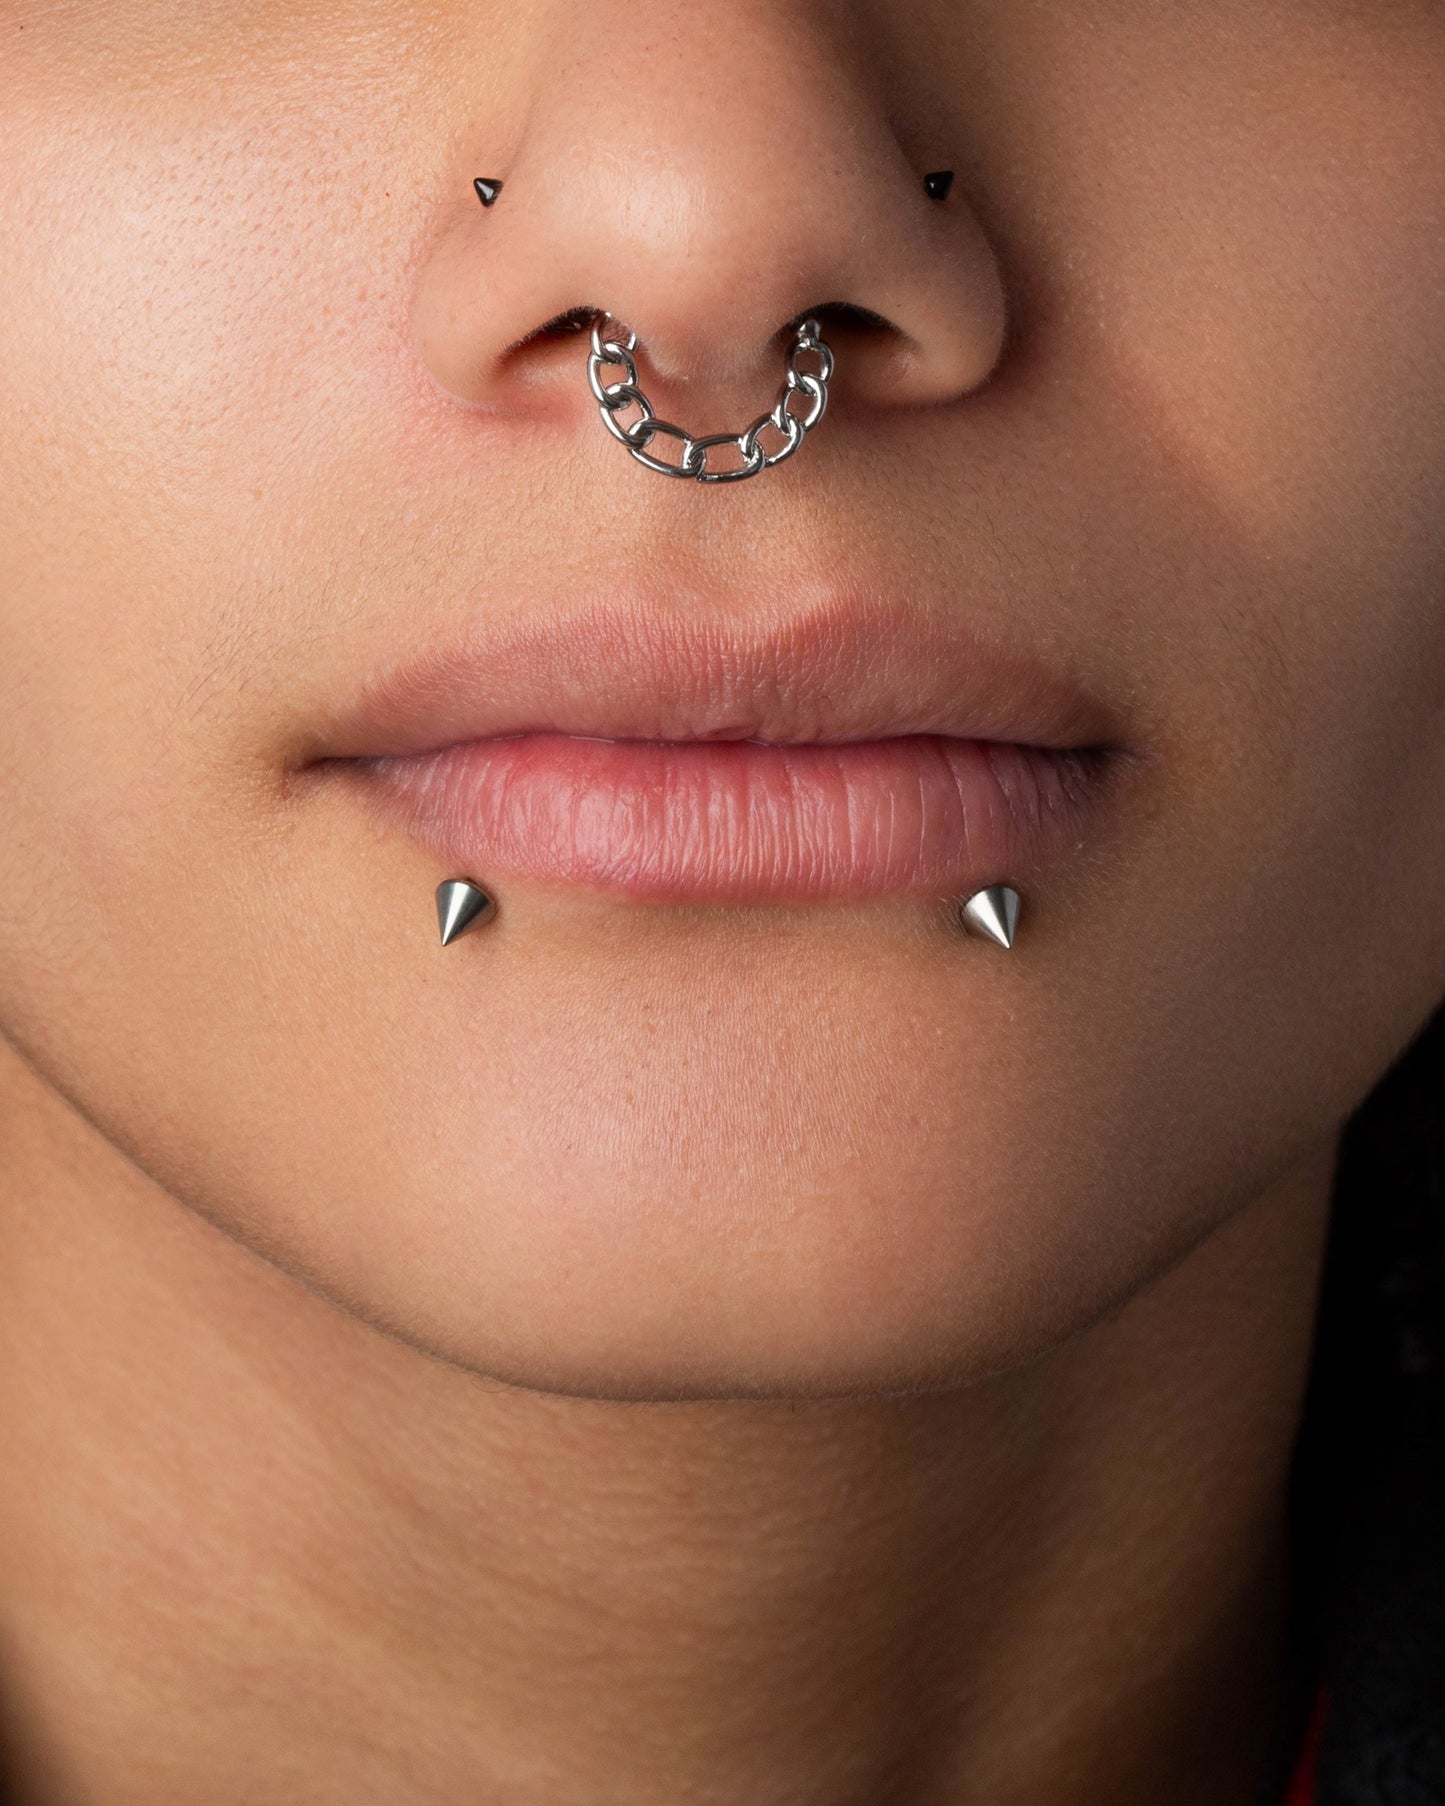 Tough Chain Link Round Nose Septum Clicker - 316L Stainless Steel